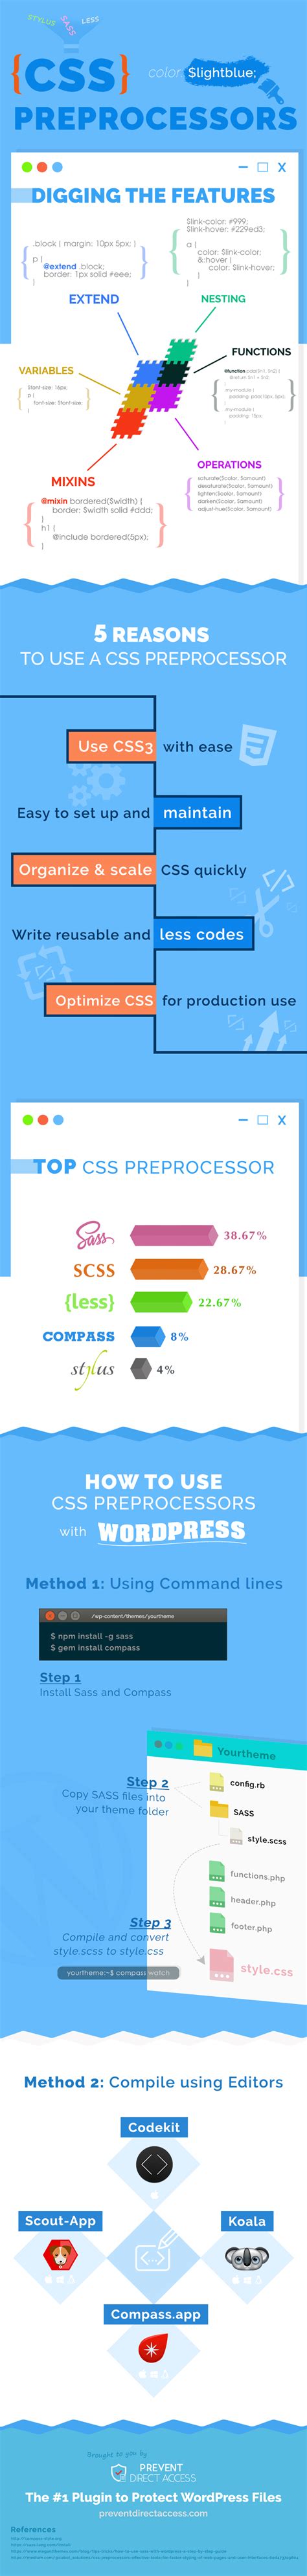 How To Use Css Preprocessors With Wordpress Infographic Learnwoo